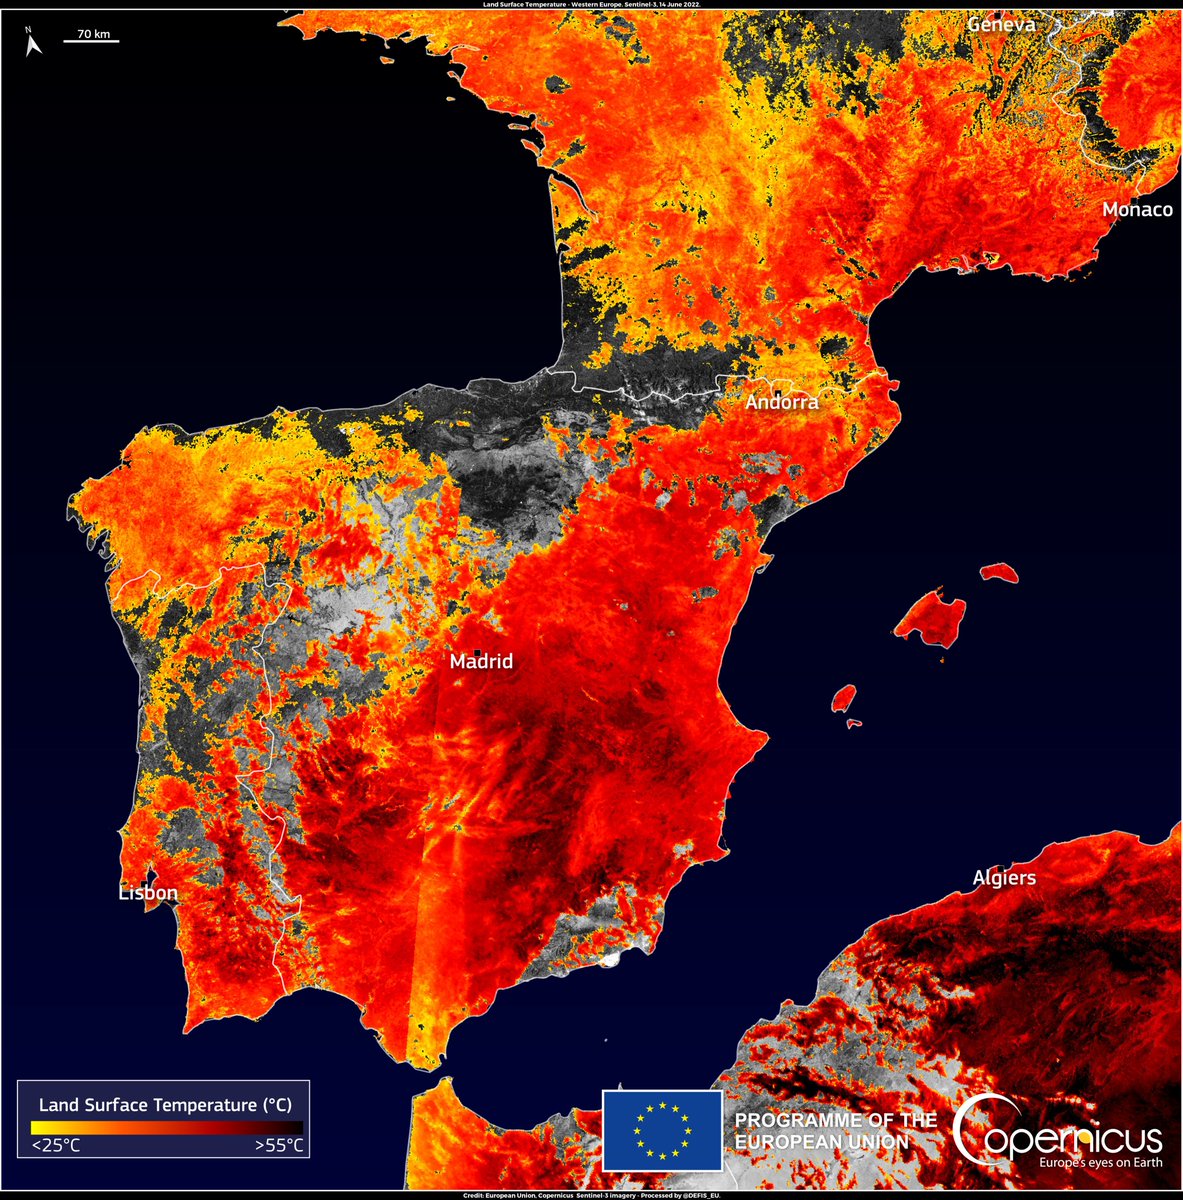 Image taken by Copernicus on 14 June. It shows the land surface temperature in a scale of warm colours; the darker the colour, the higher the temperature.